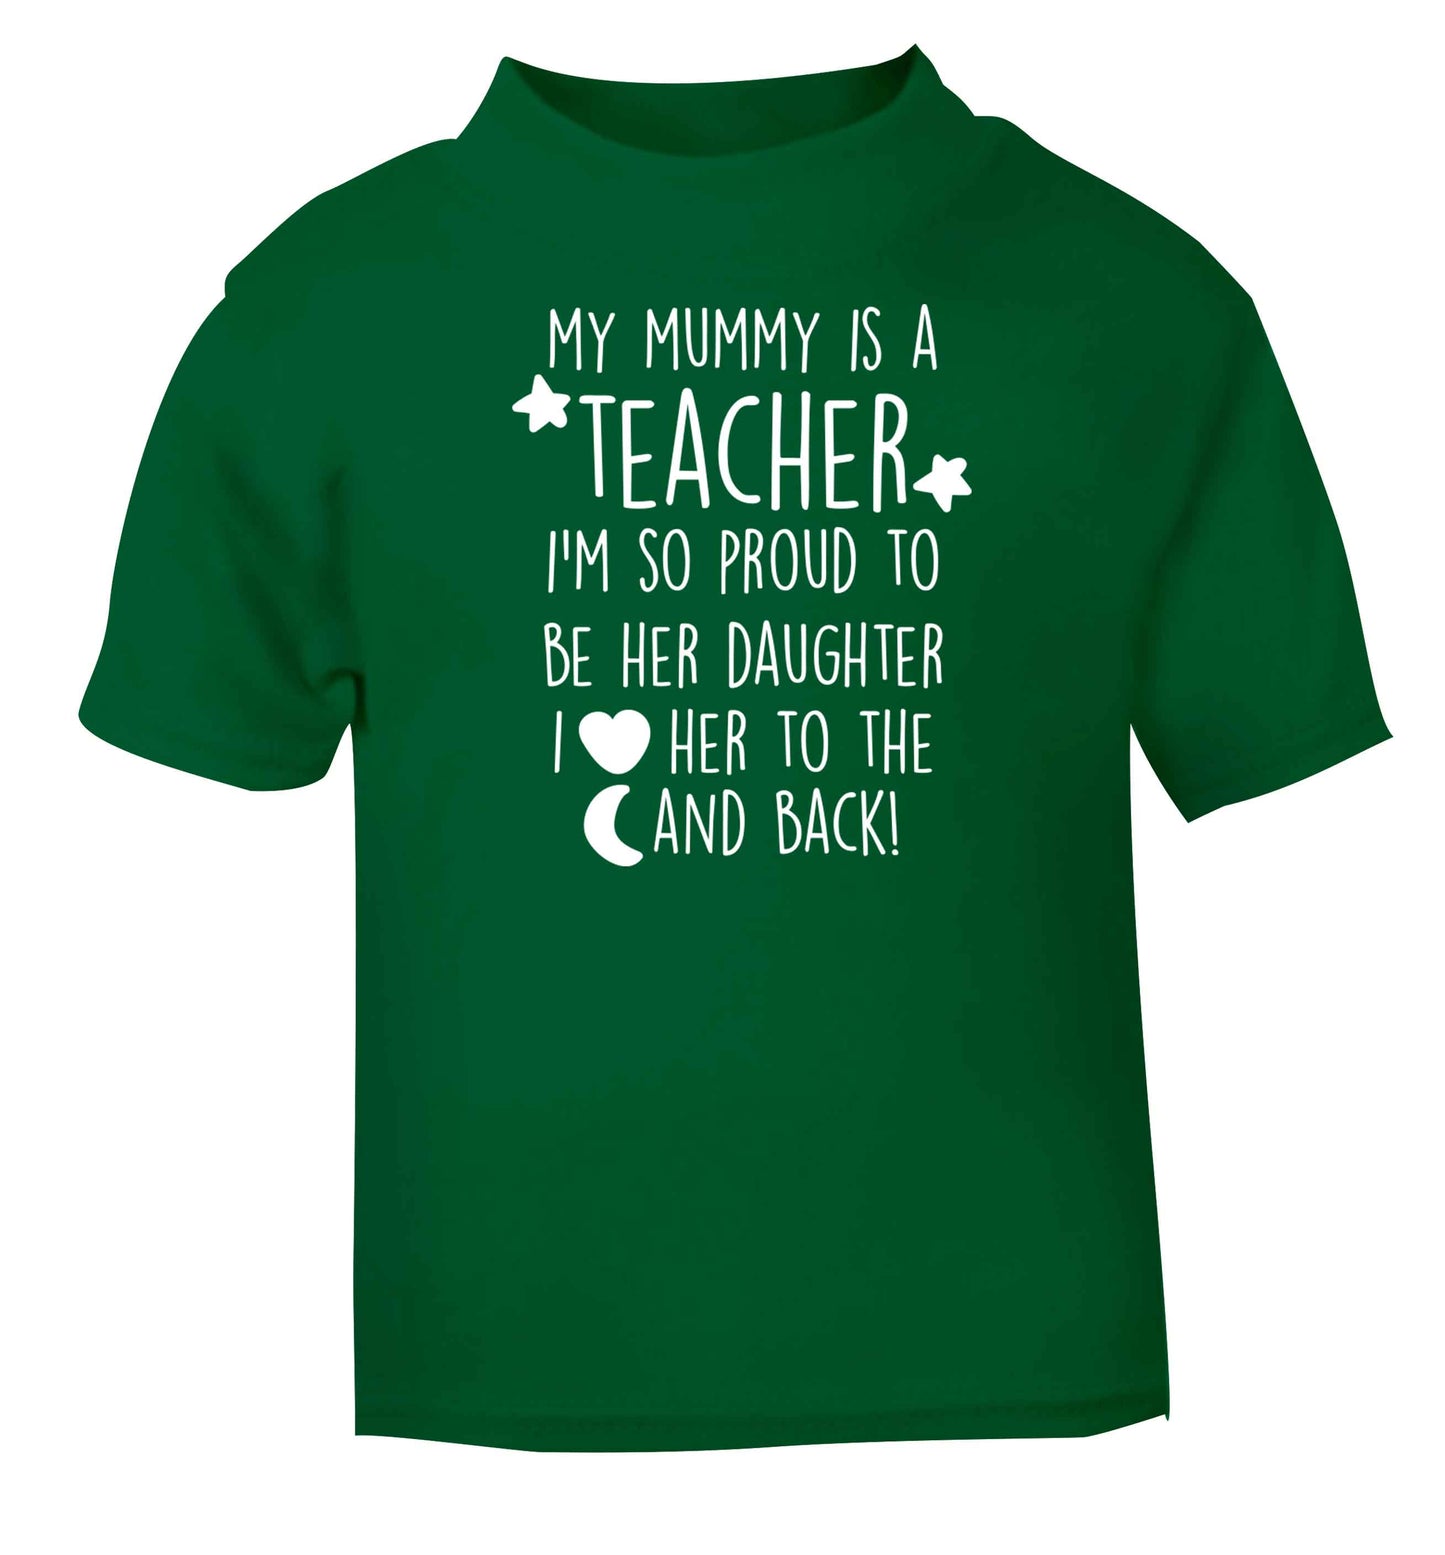 My mummy is a teacher I'm so proud to be her daughter I love her to the moon and back green baby toddler Tshirt 2 Years